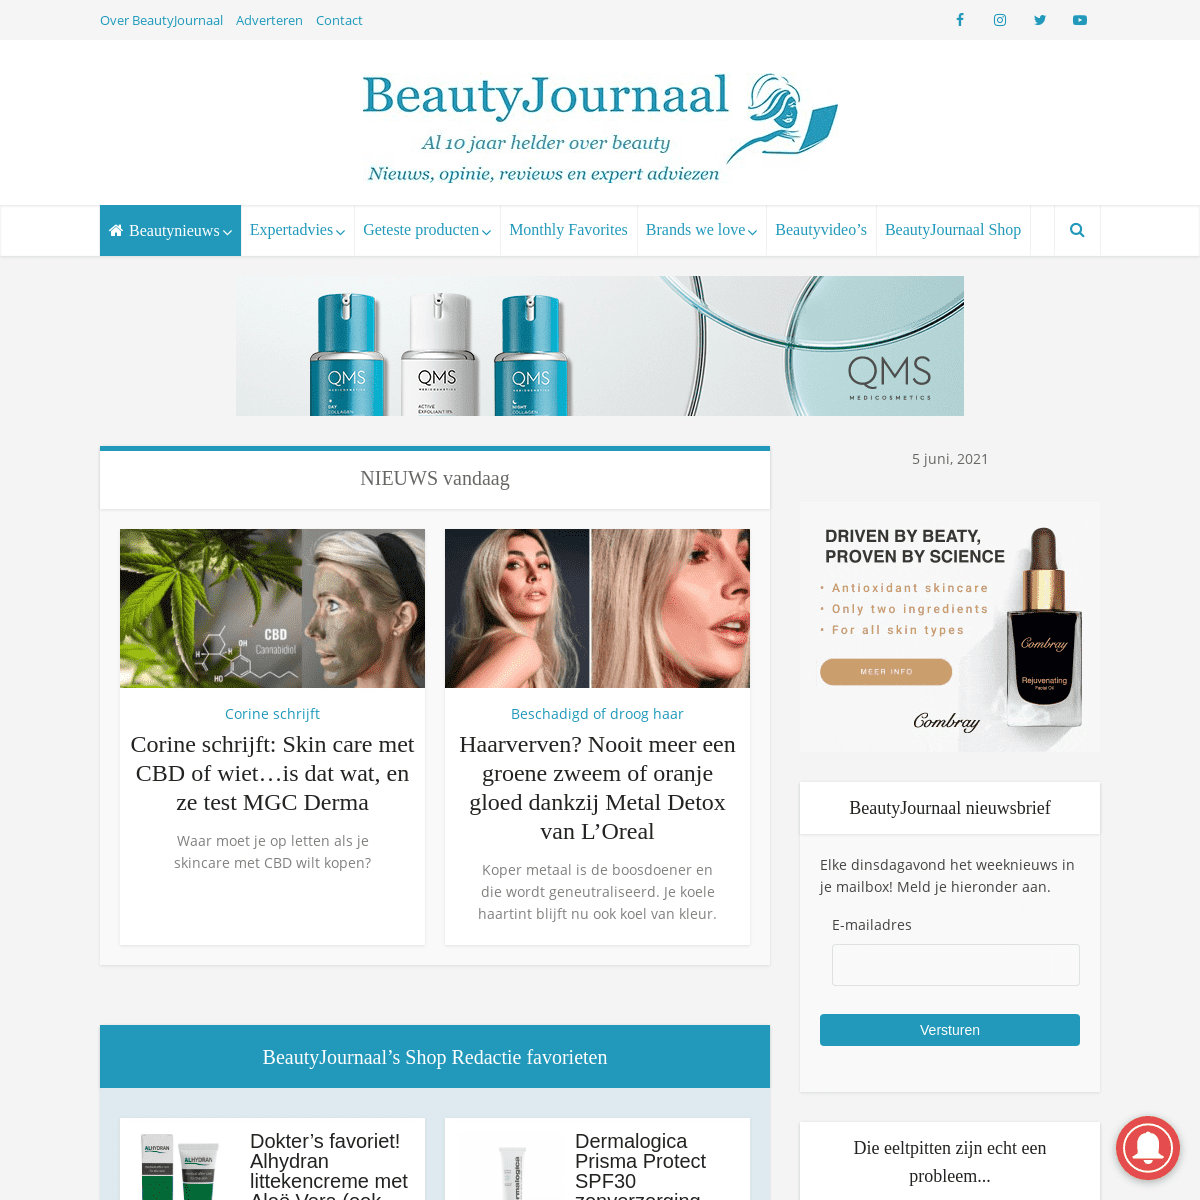 A complete backup of https://beautyjournaal.nl